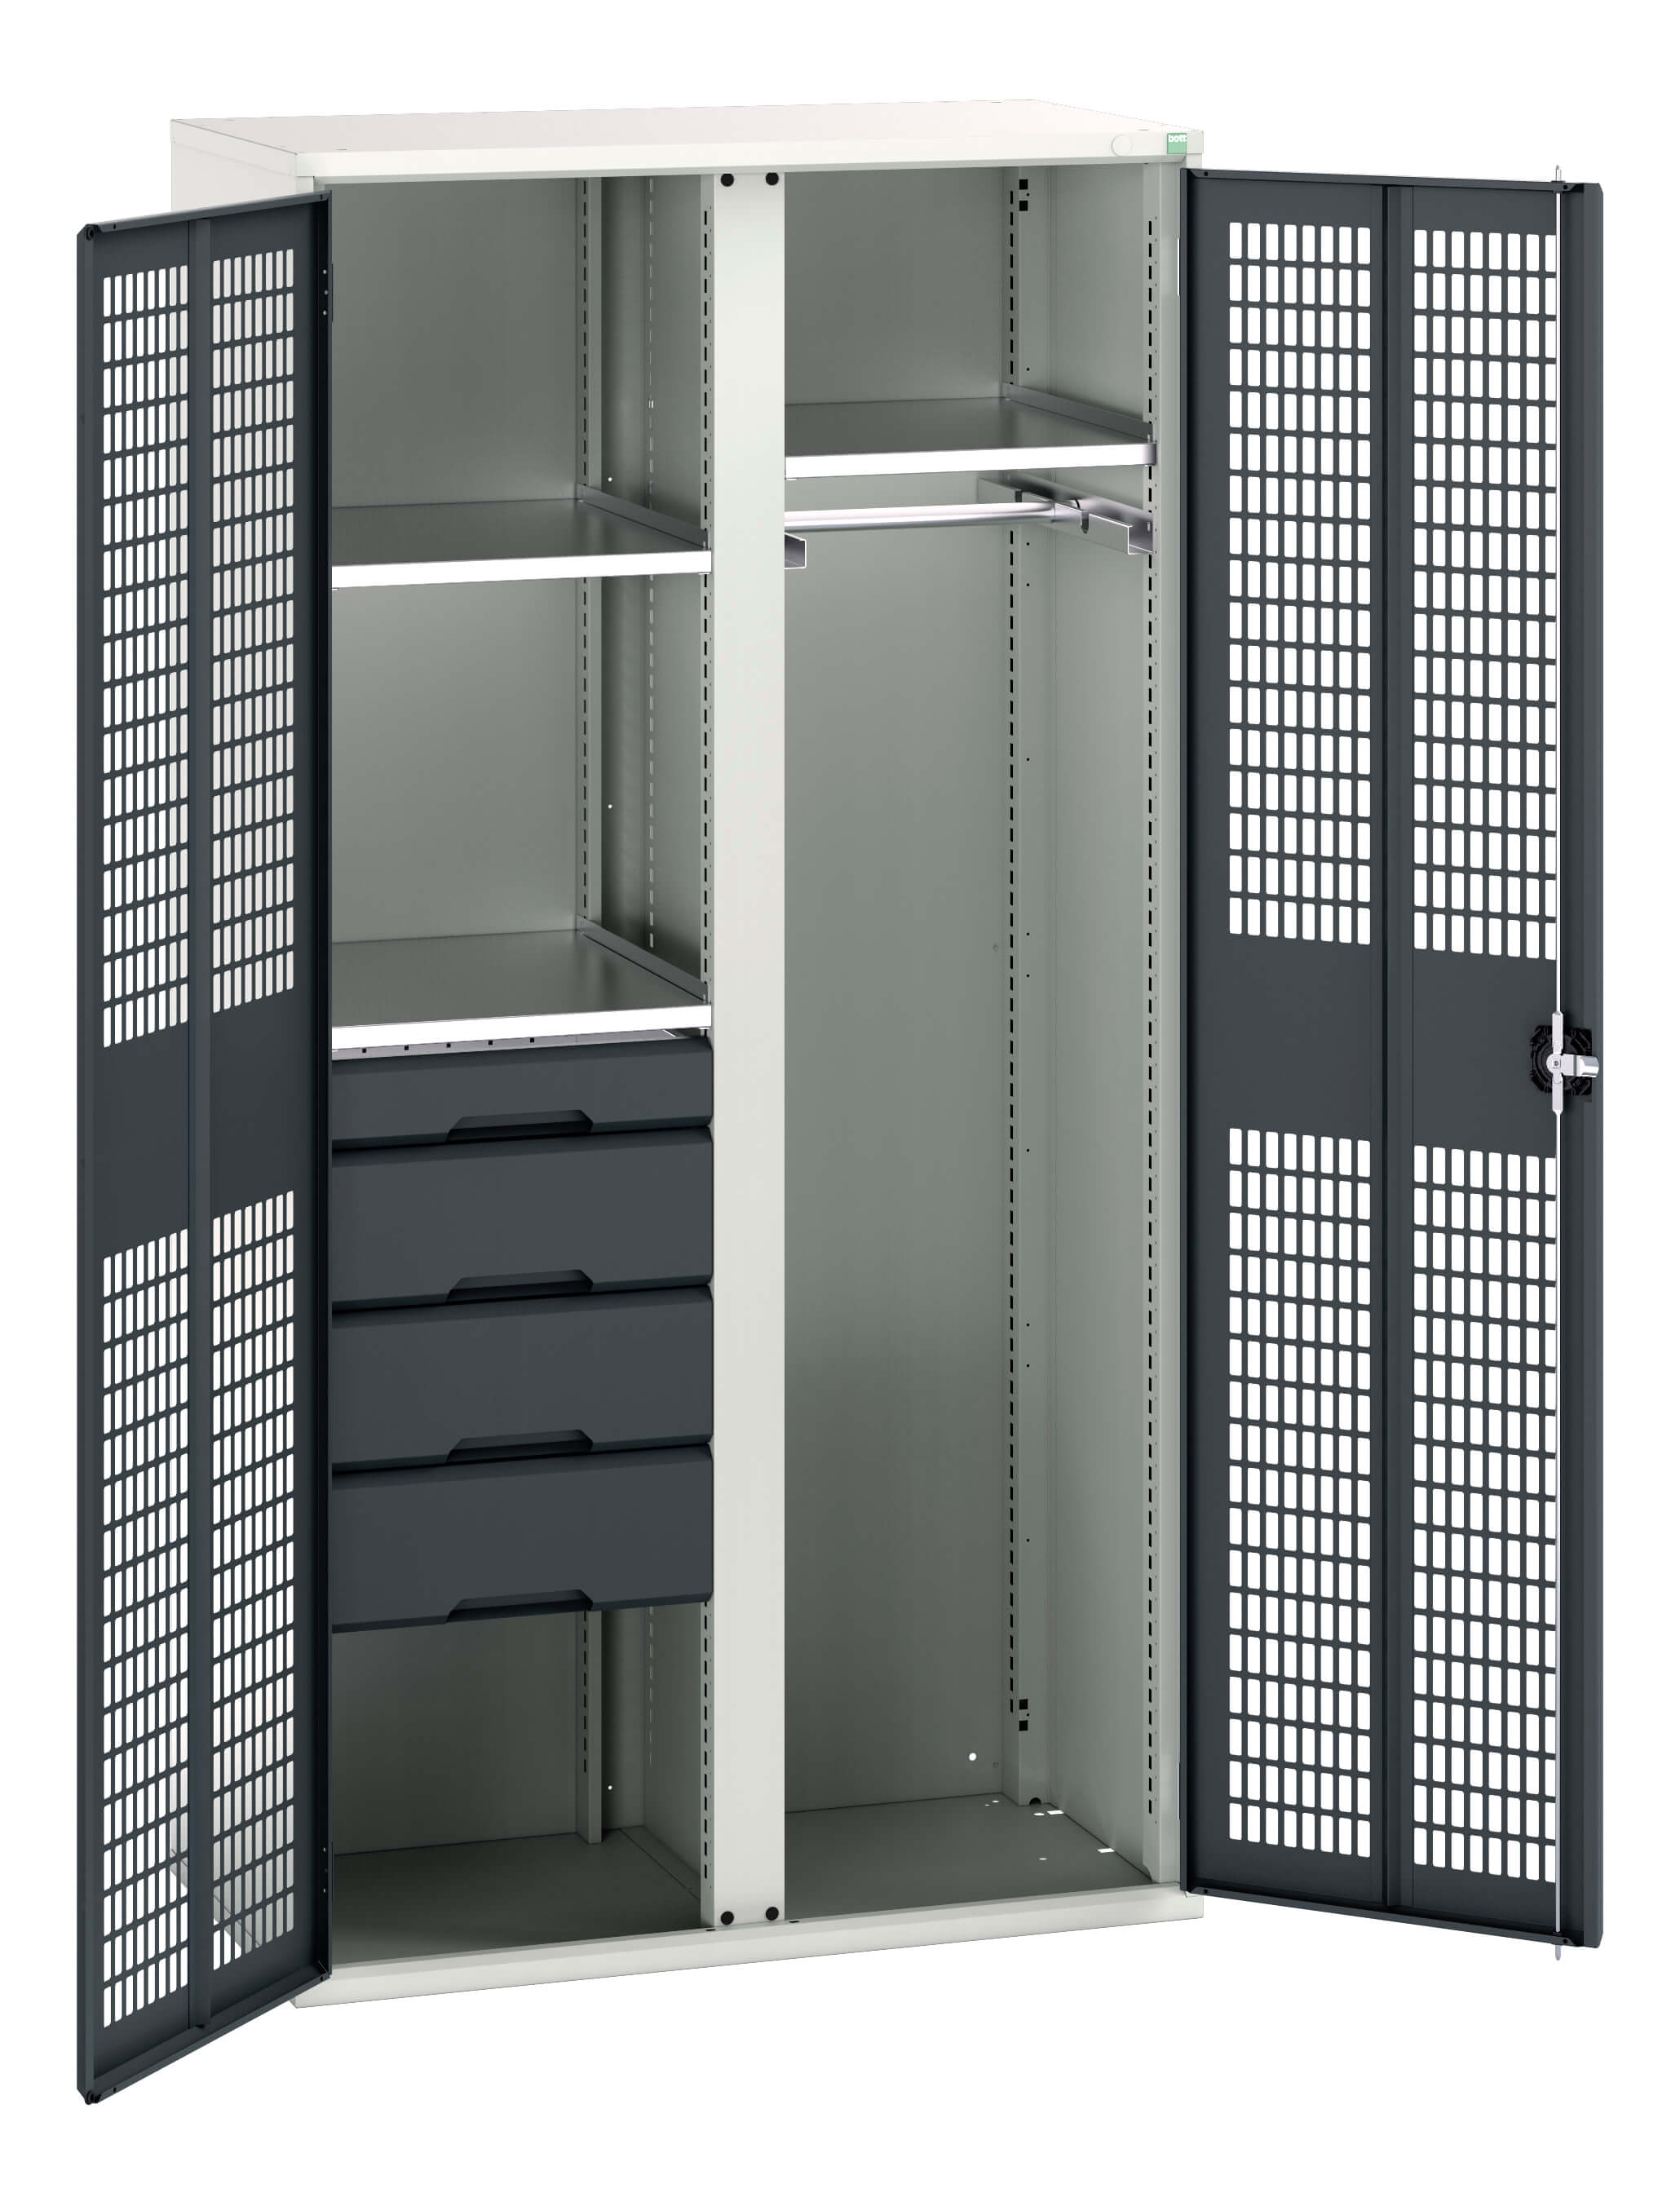 Bott Verso Ventilated Door Ppe / Janitorial Kitted Cupboard With Vertical Partition - 16926776.19